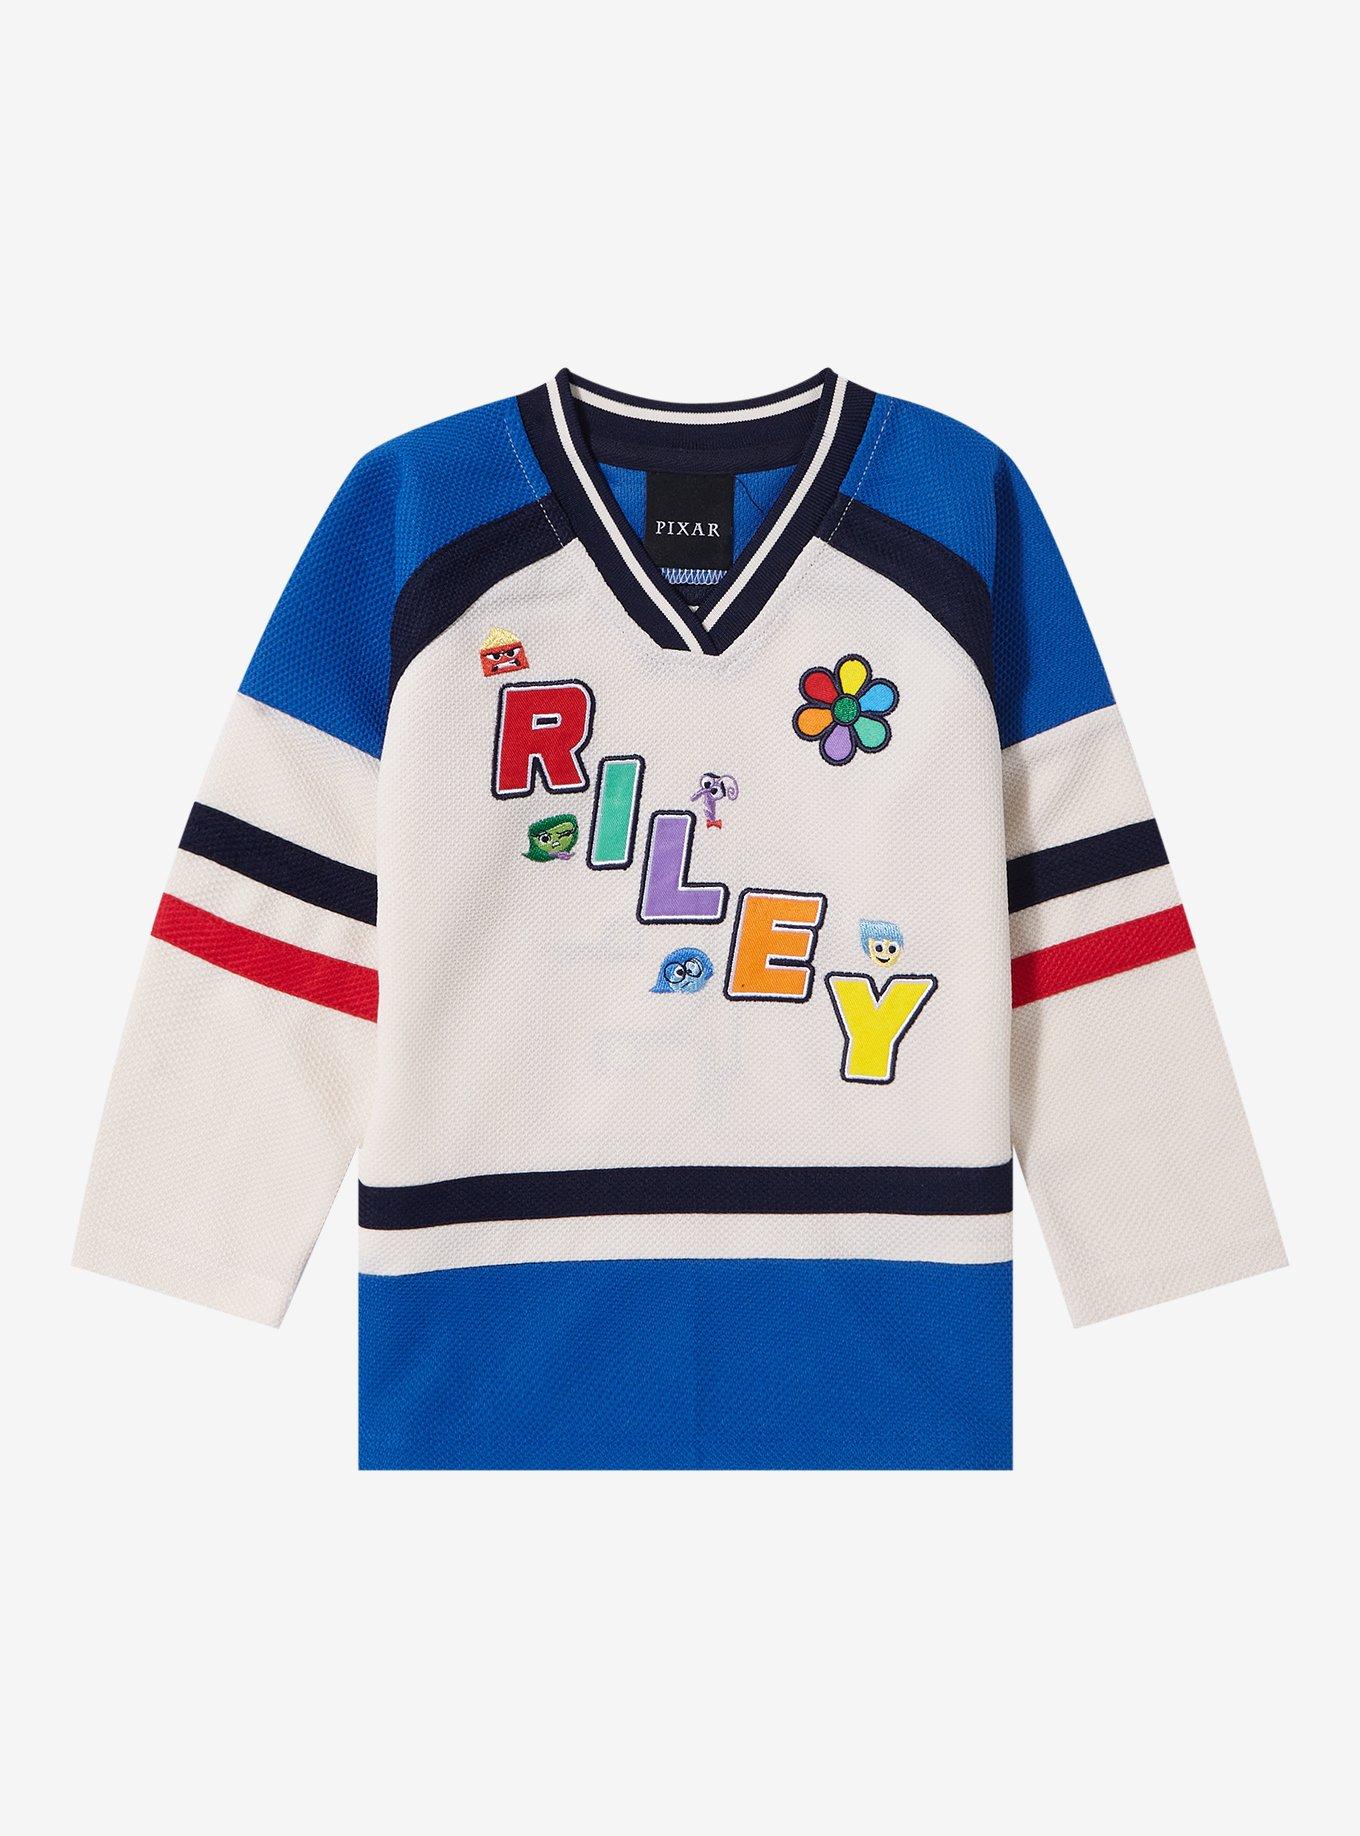 Disney Pixar Inside Out Riley Toddler Hockey Jersey — BoxLunch Exclusive, BLUE, hi-res